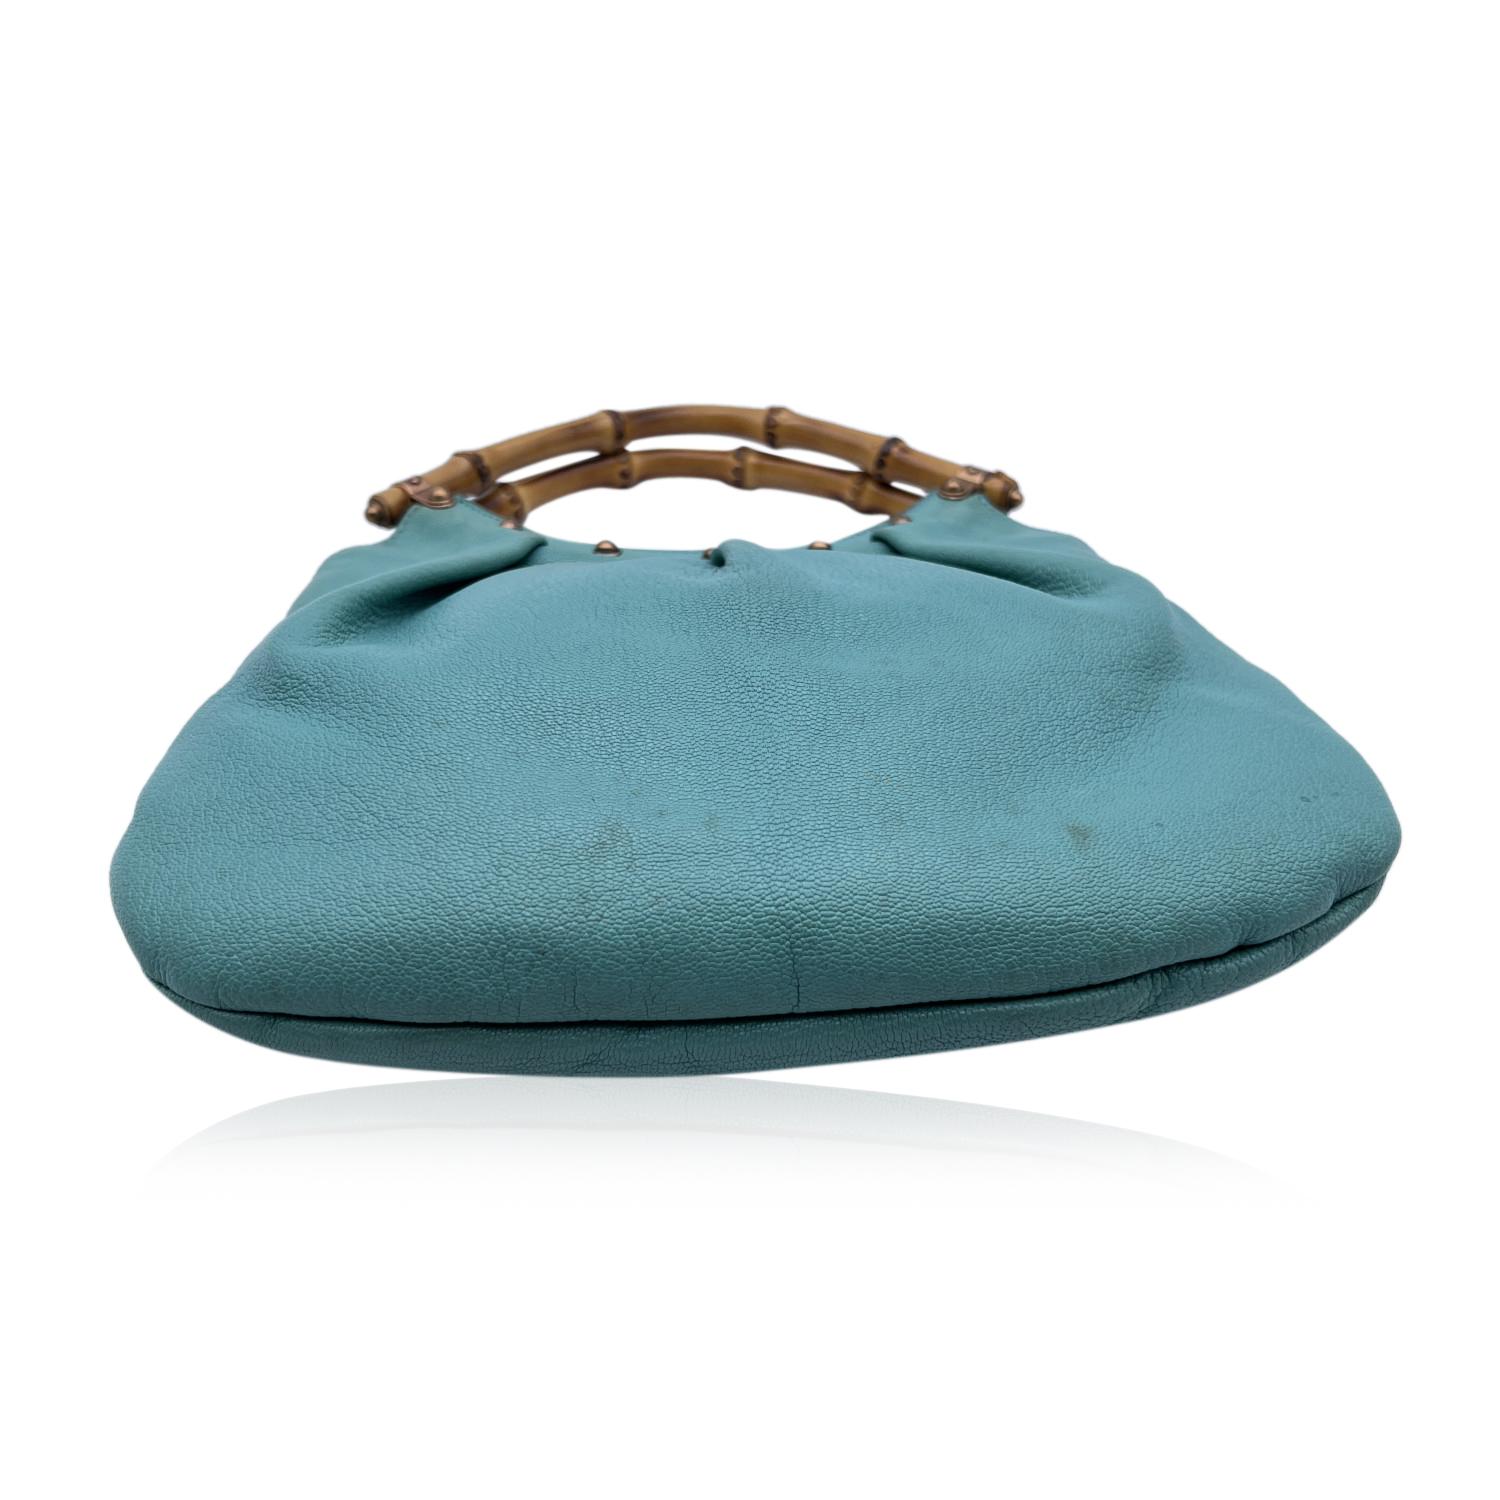 Gucci Turquoise Leather Bamboo Studded Handbag Hobo Bag In Good Condition For Sale In Rome, Rome